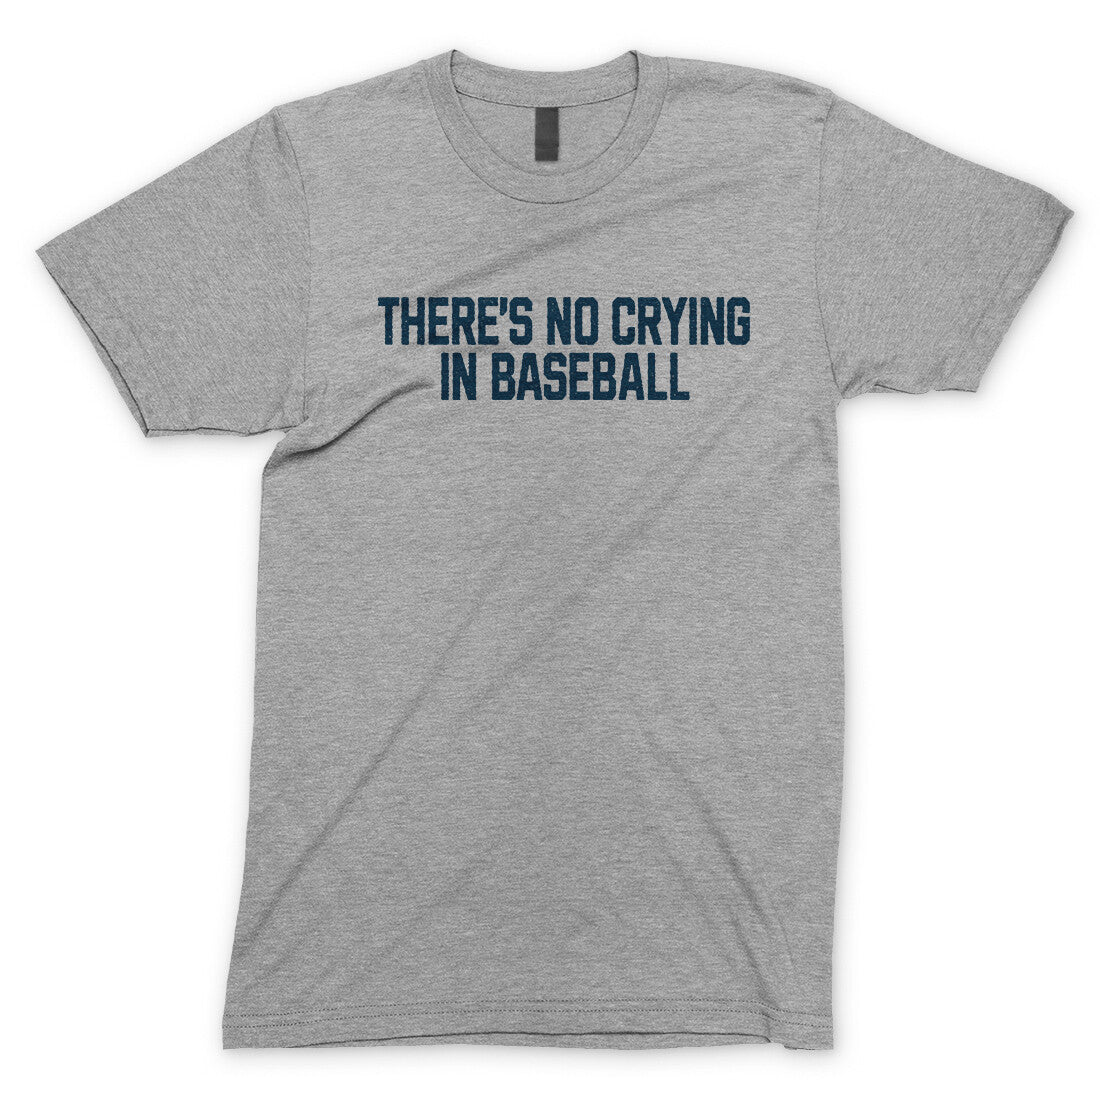 There's No Crying in Baseball in Sport Grey Color